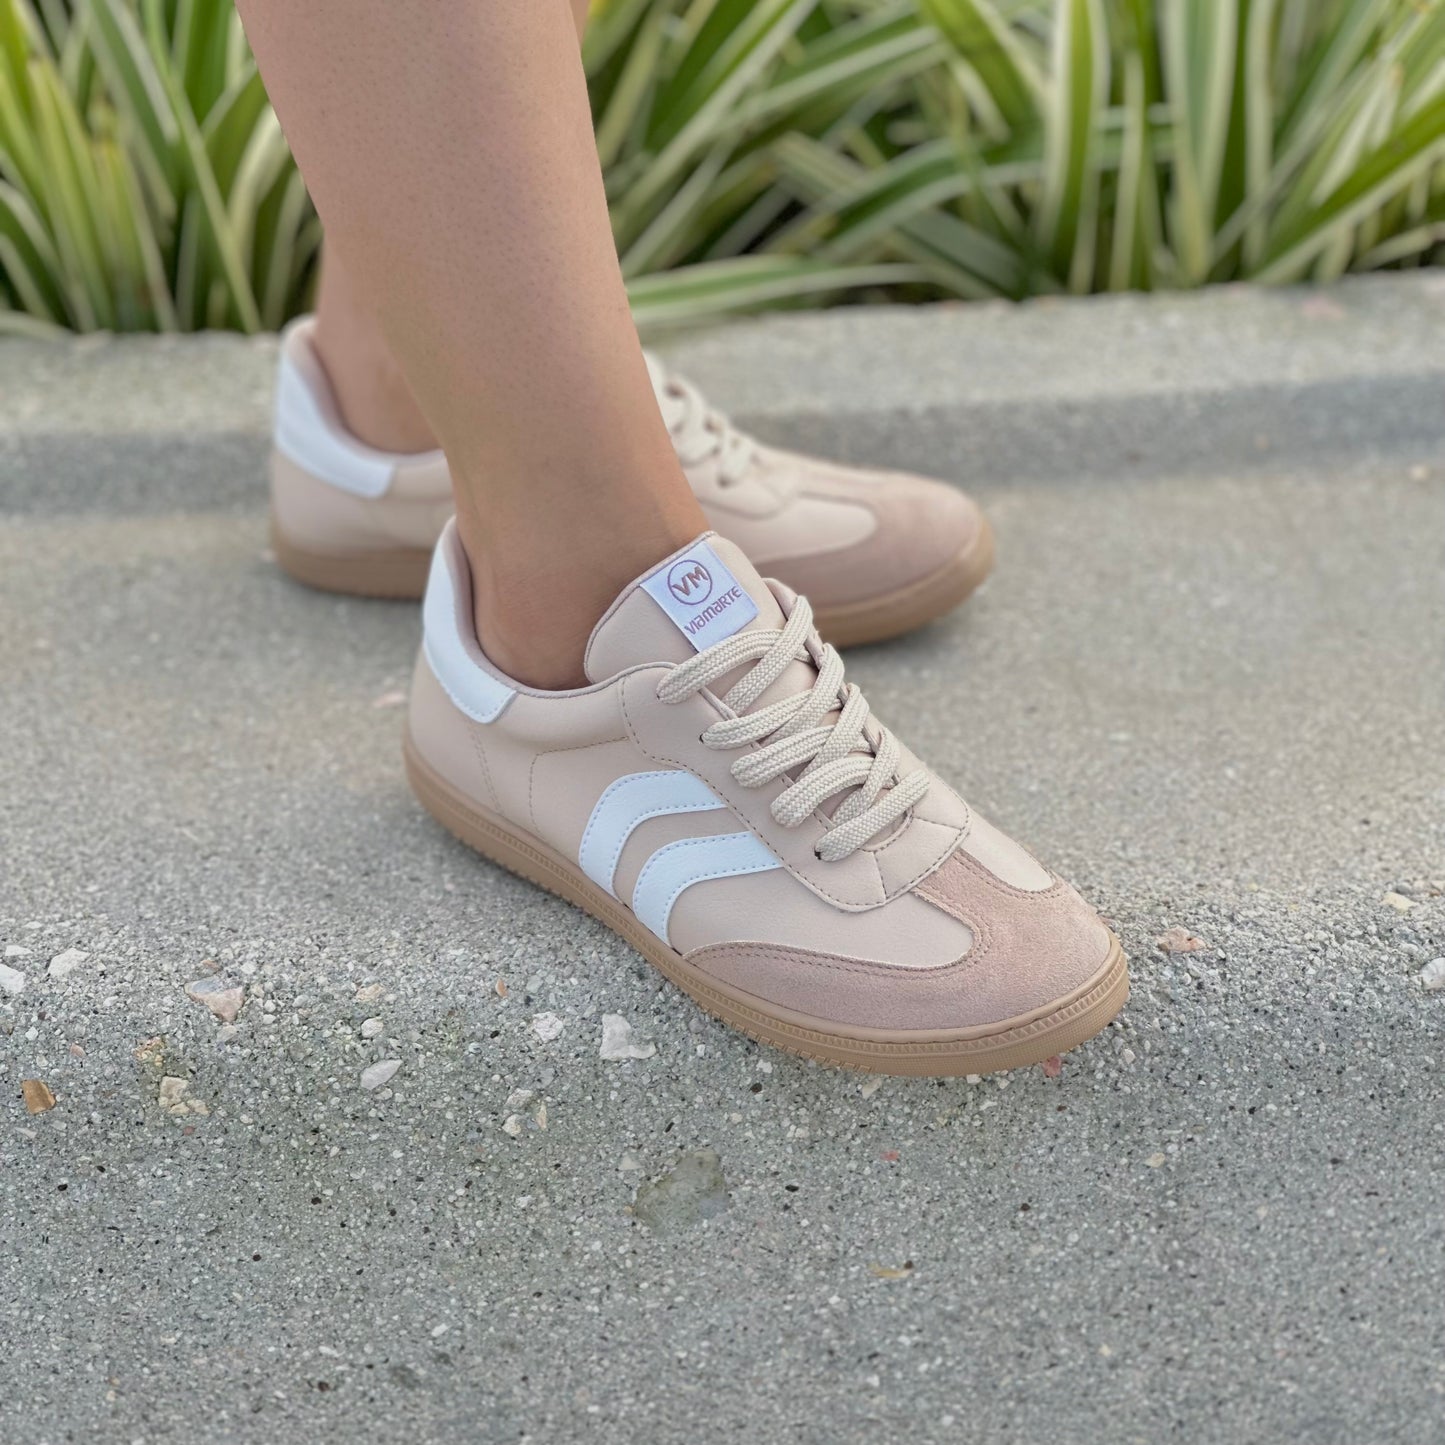 Celia beige and white low sneaker